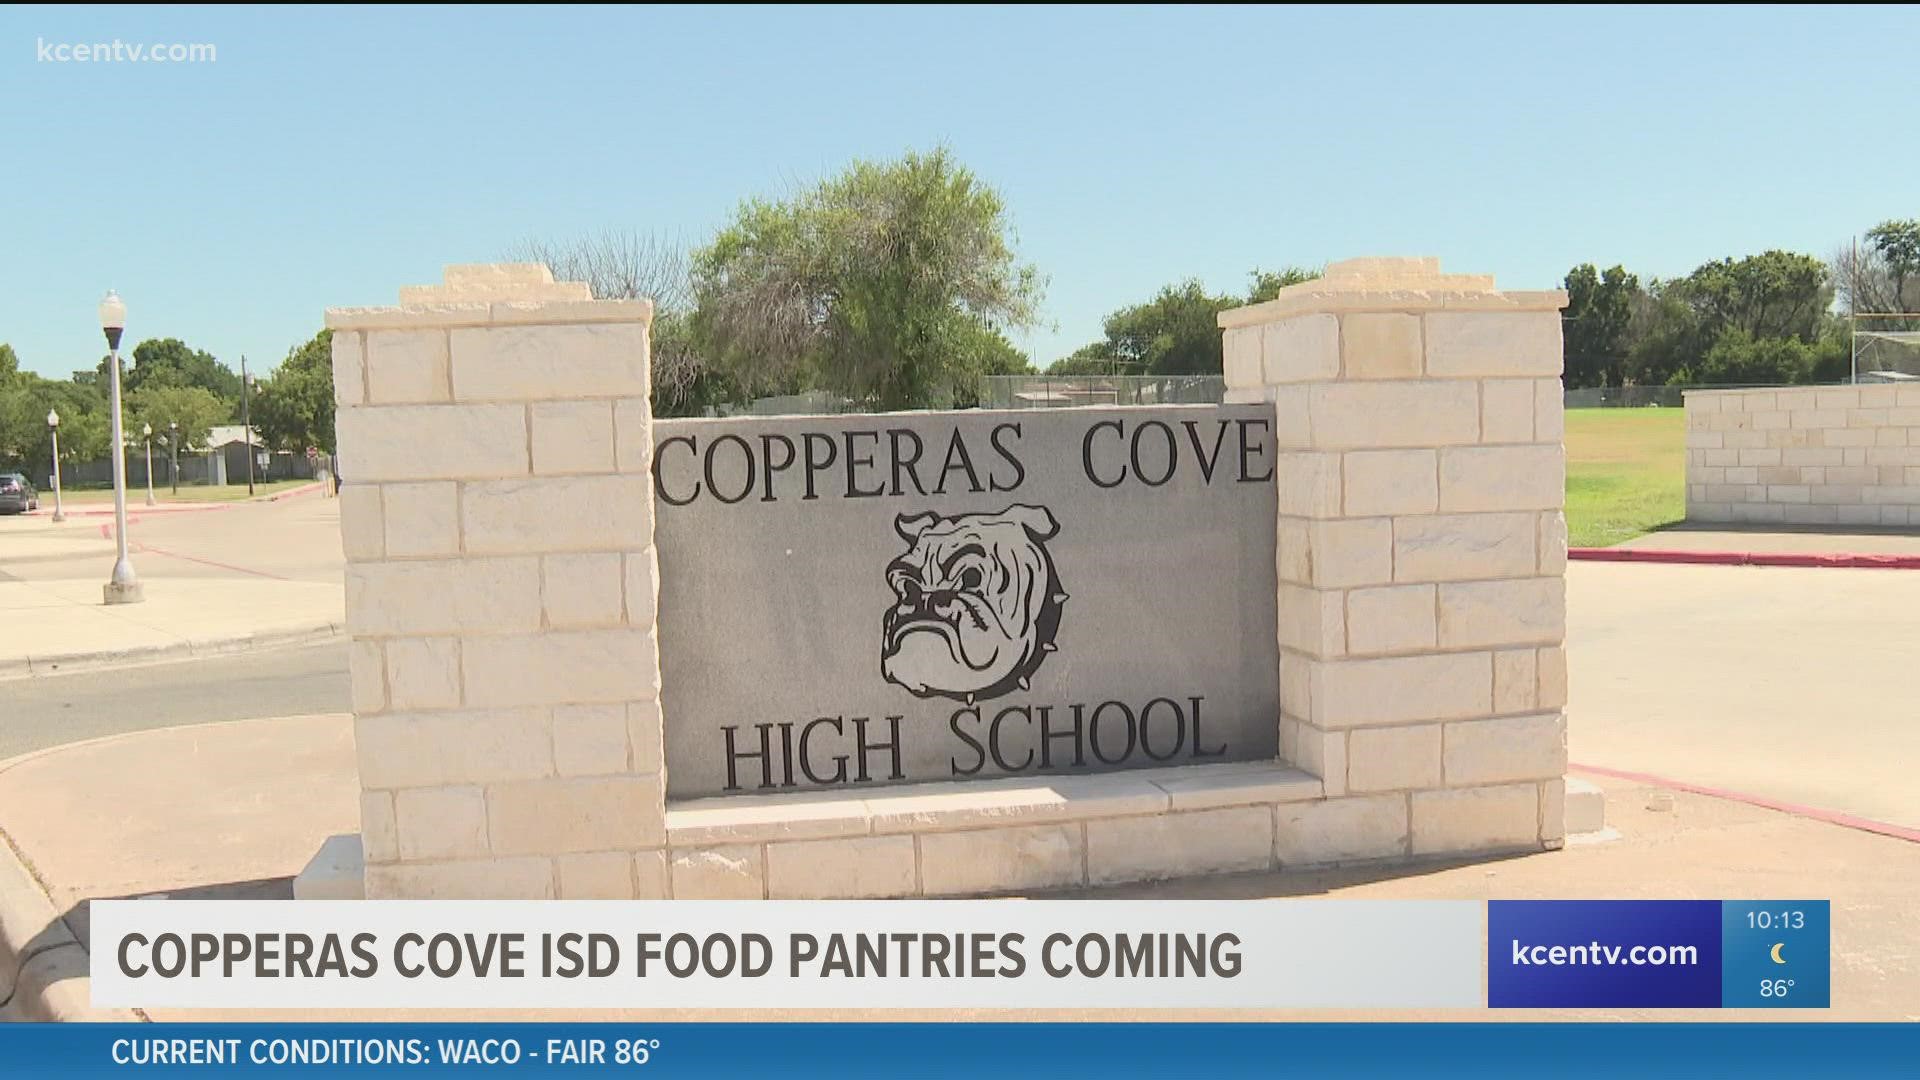 Copperas Cove ISD will have food pantries on every school campus by the end of the school year